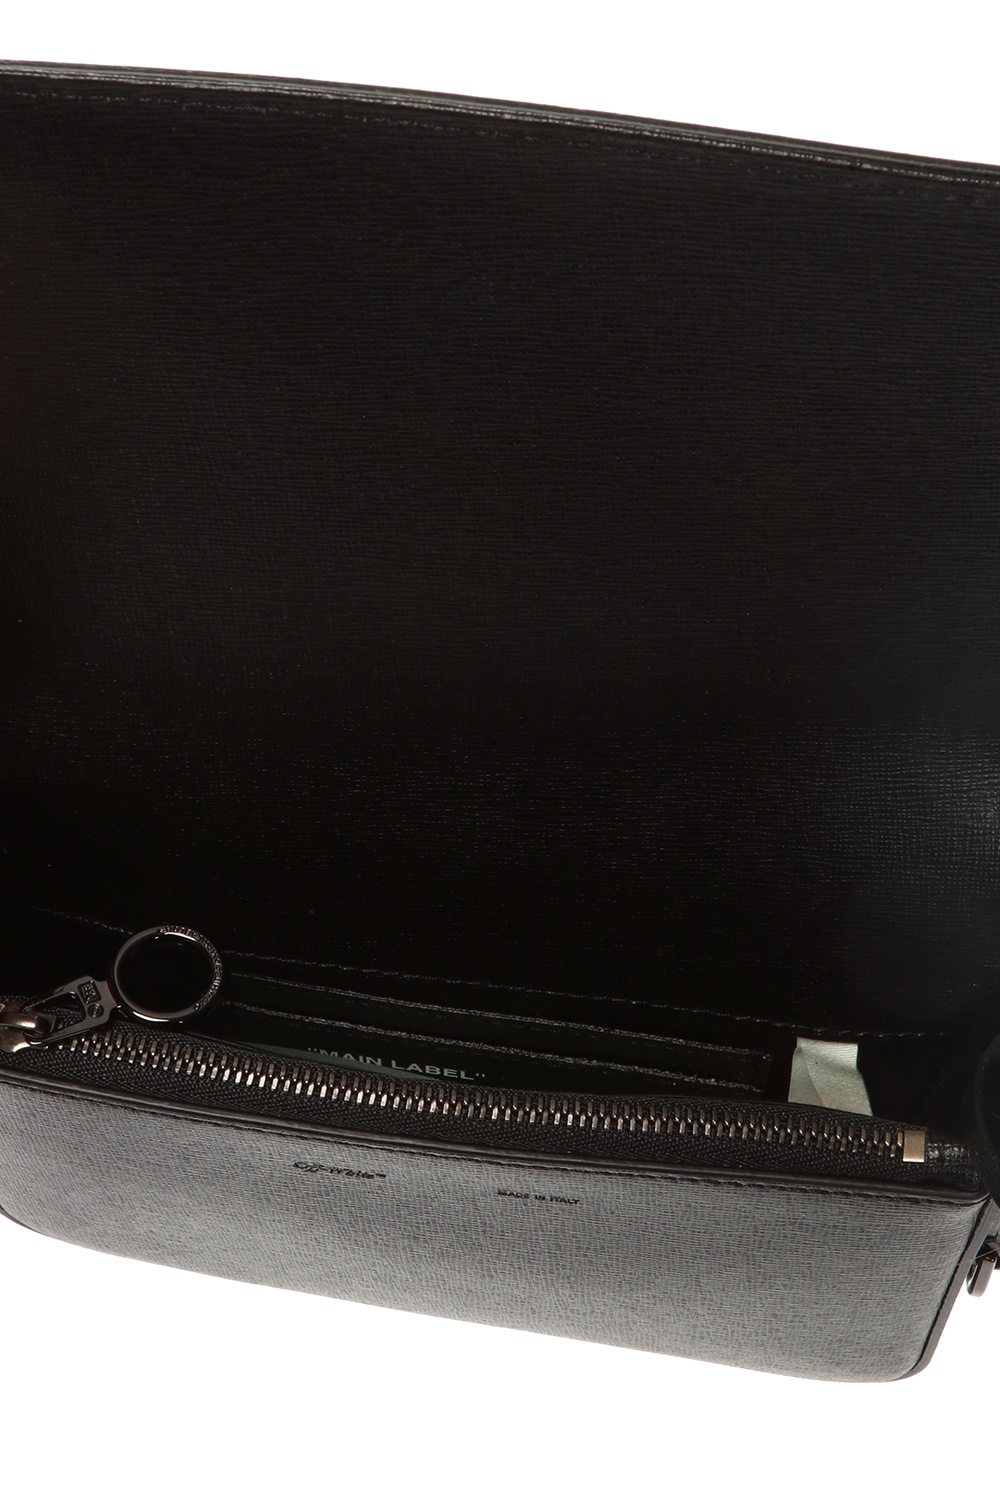 Black Embossed Diag Small Bag - GBNY